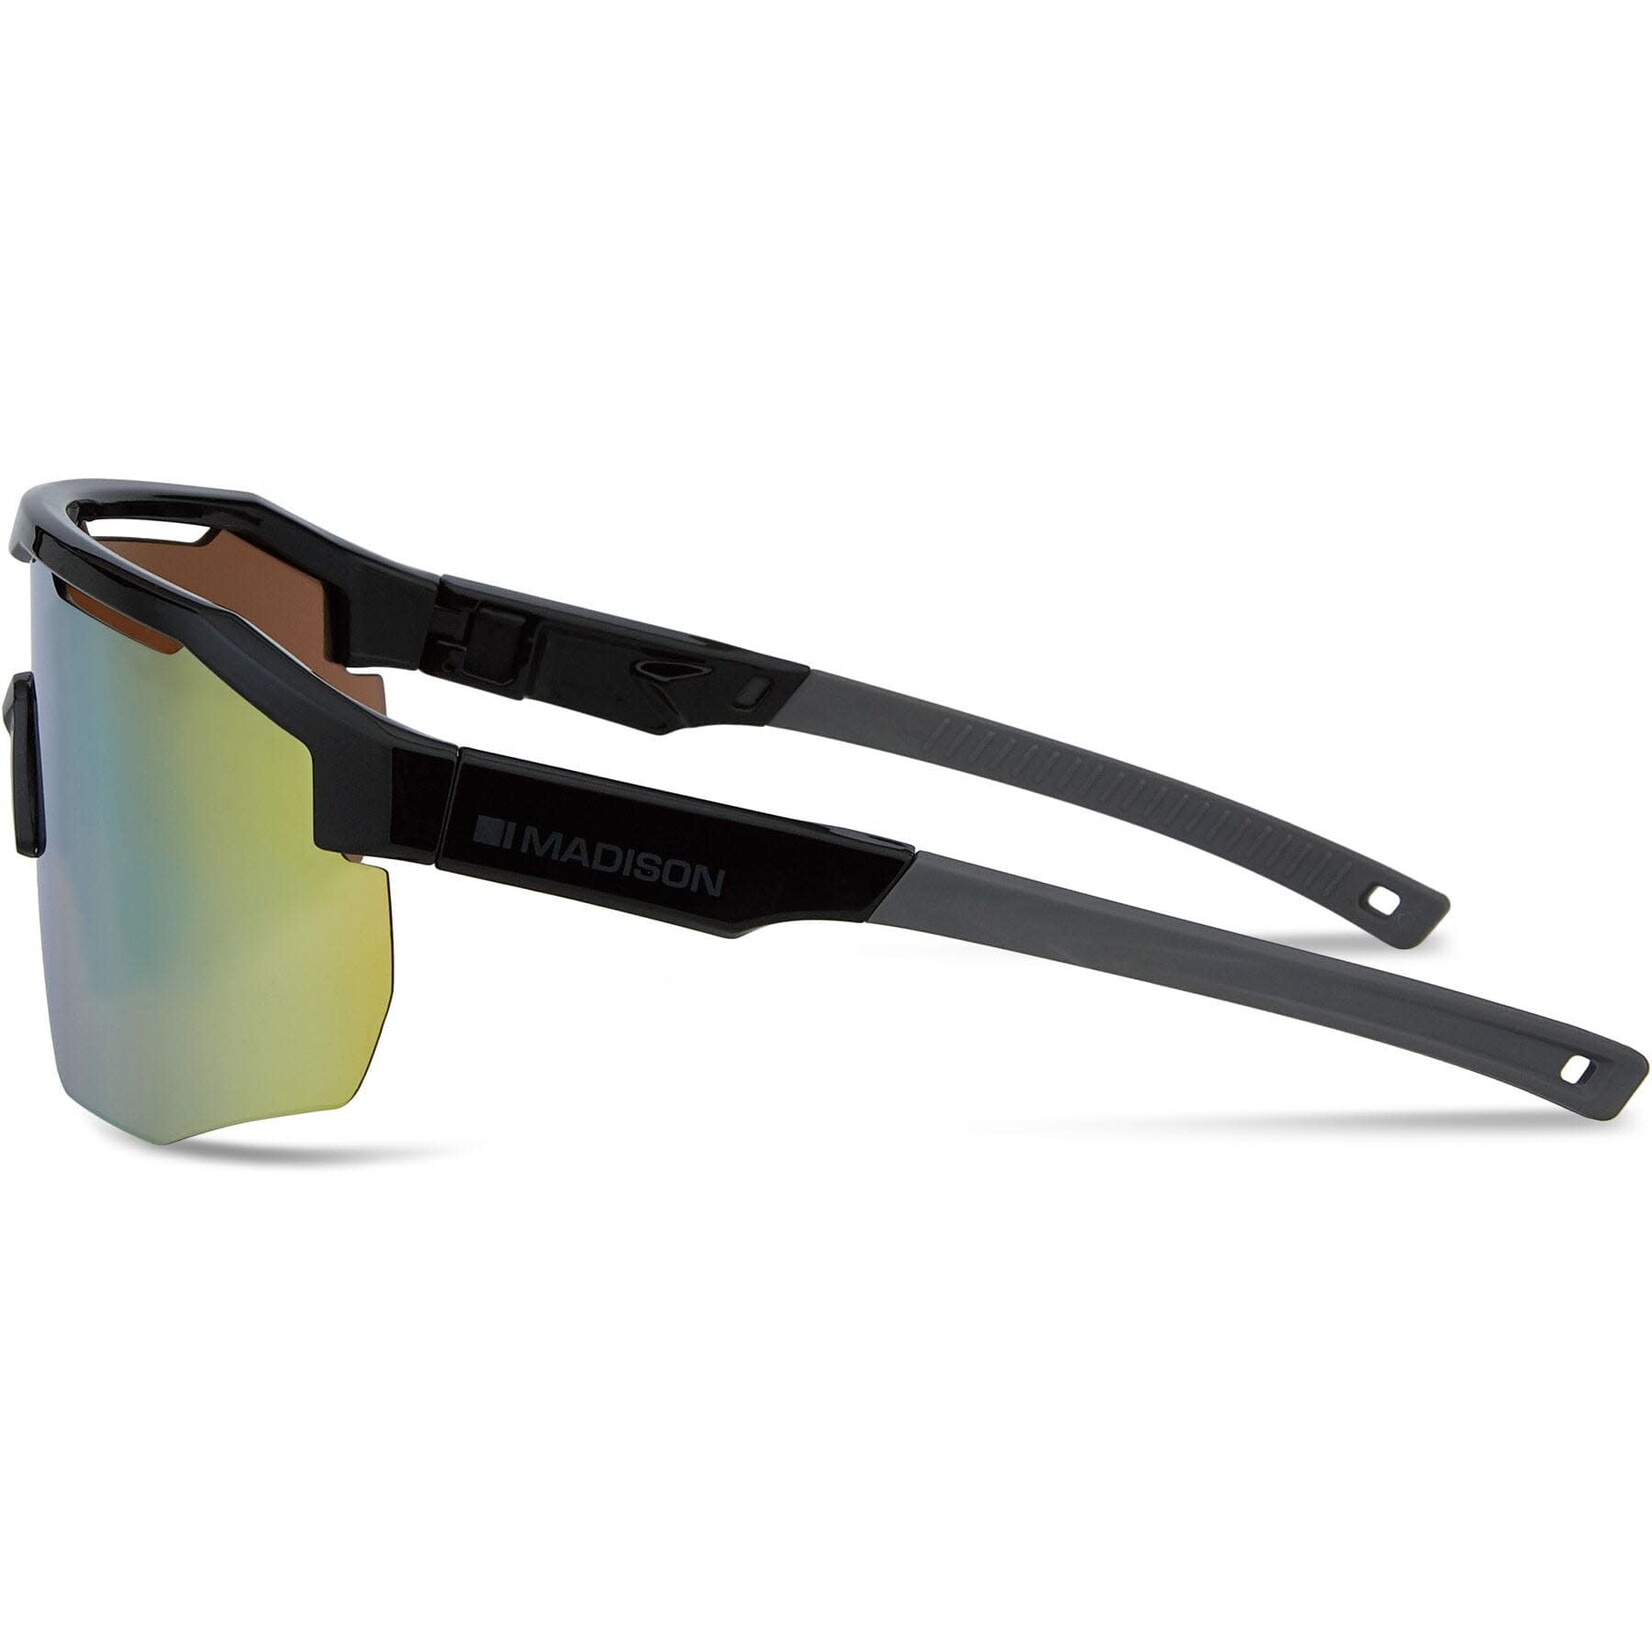 Madison Madison Cipher Glasses - 3 pack - gloss black / bronze mirror / amber and clear lens Sunglasses